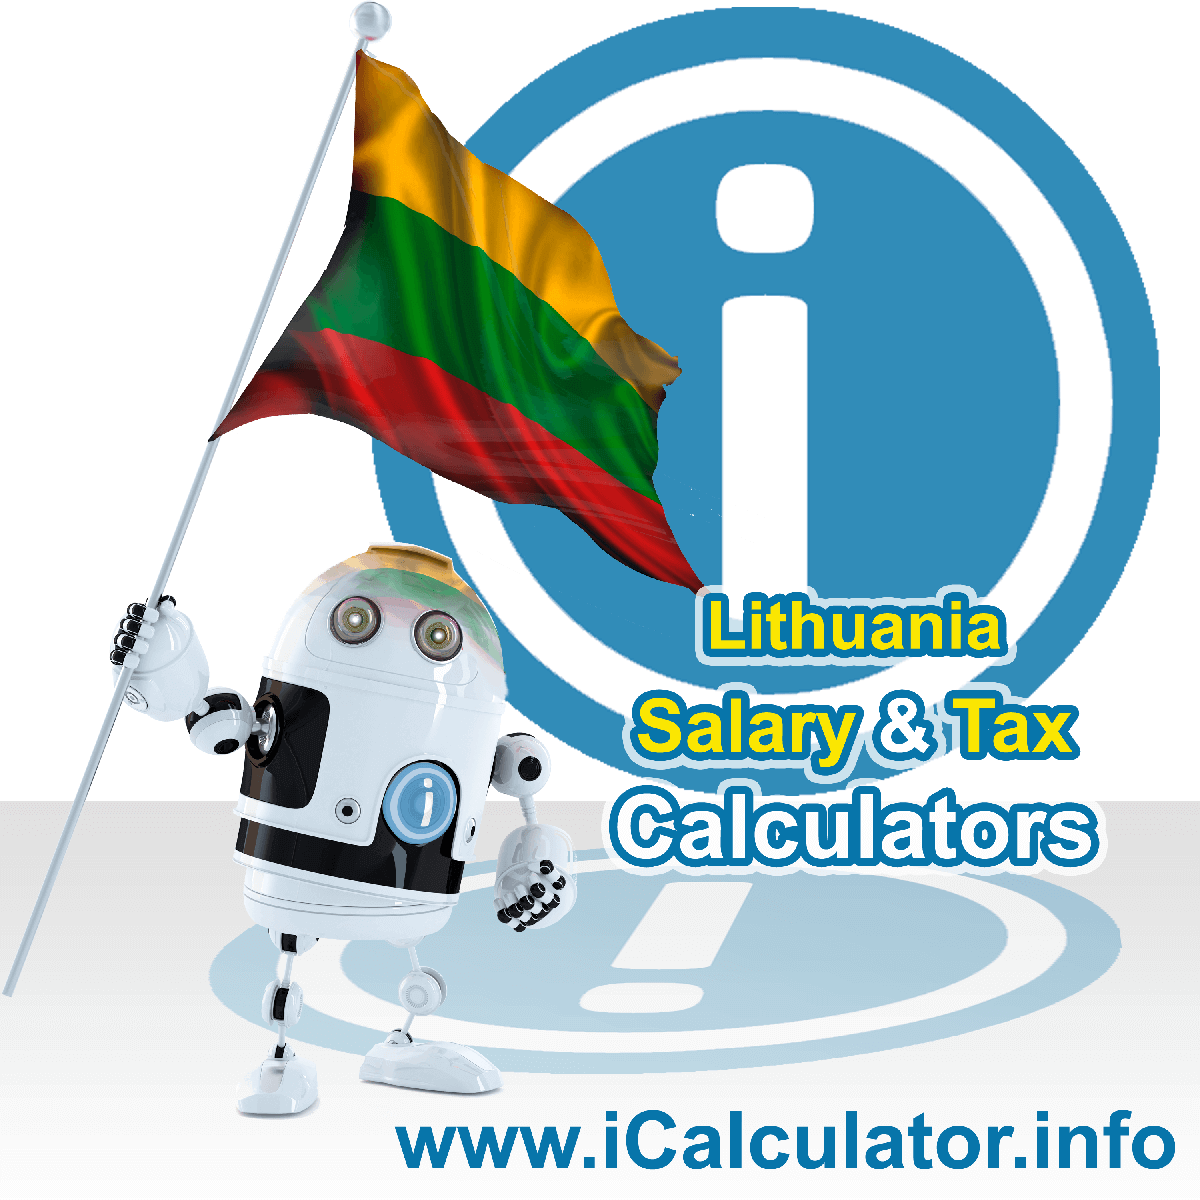 Lithuania Tax Calculator. This image shows the Lithuania flag and information relating to the tax formula for the Lithuania Salary Calculator